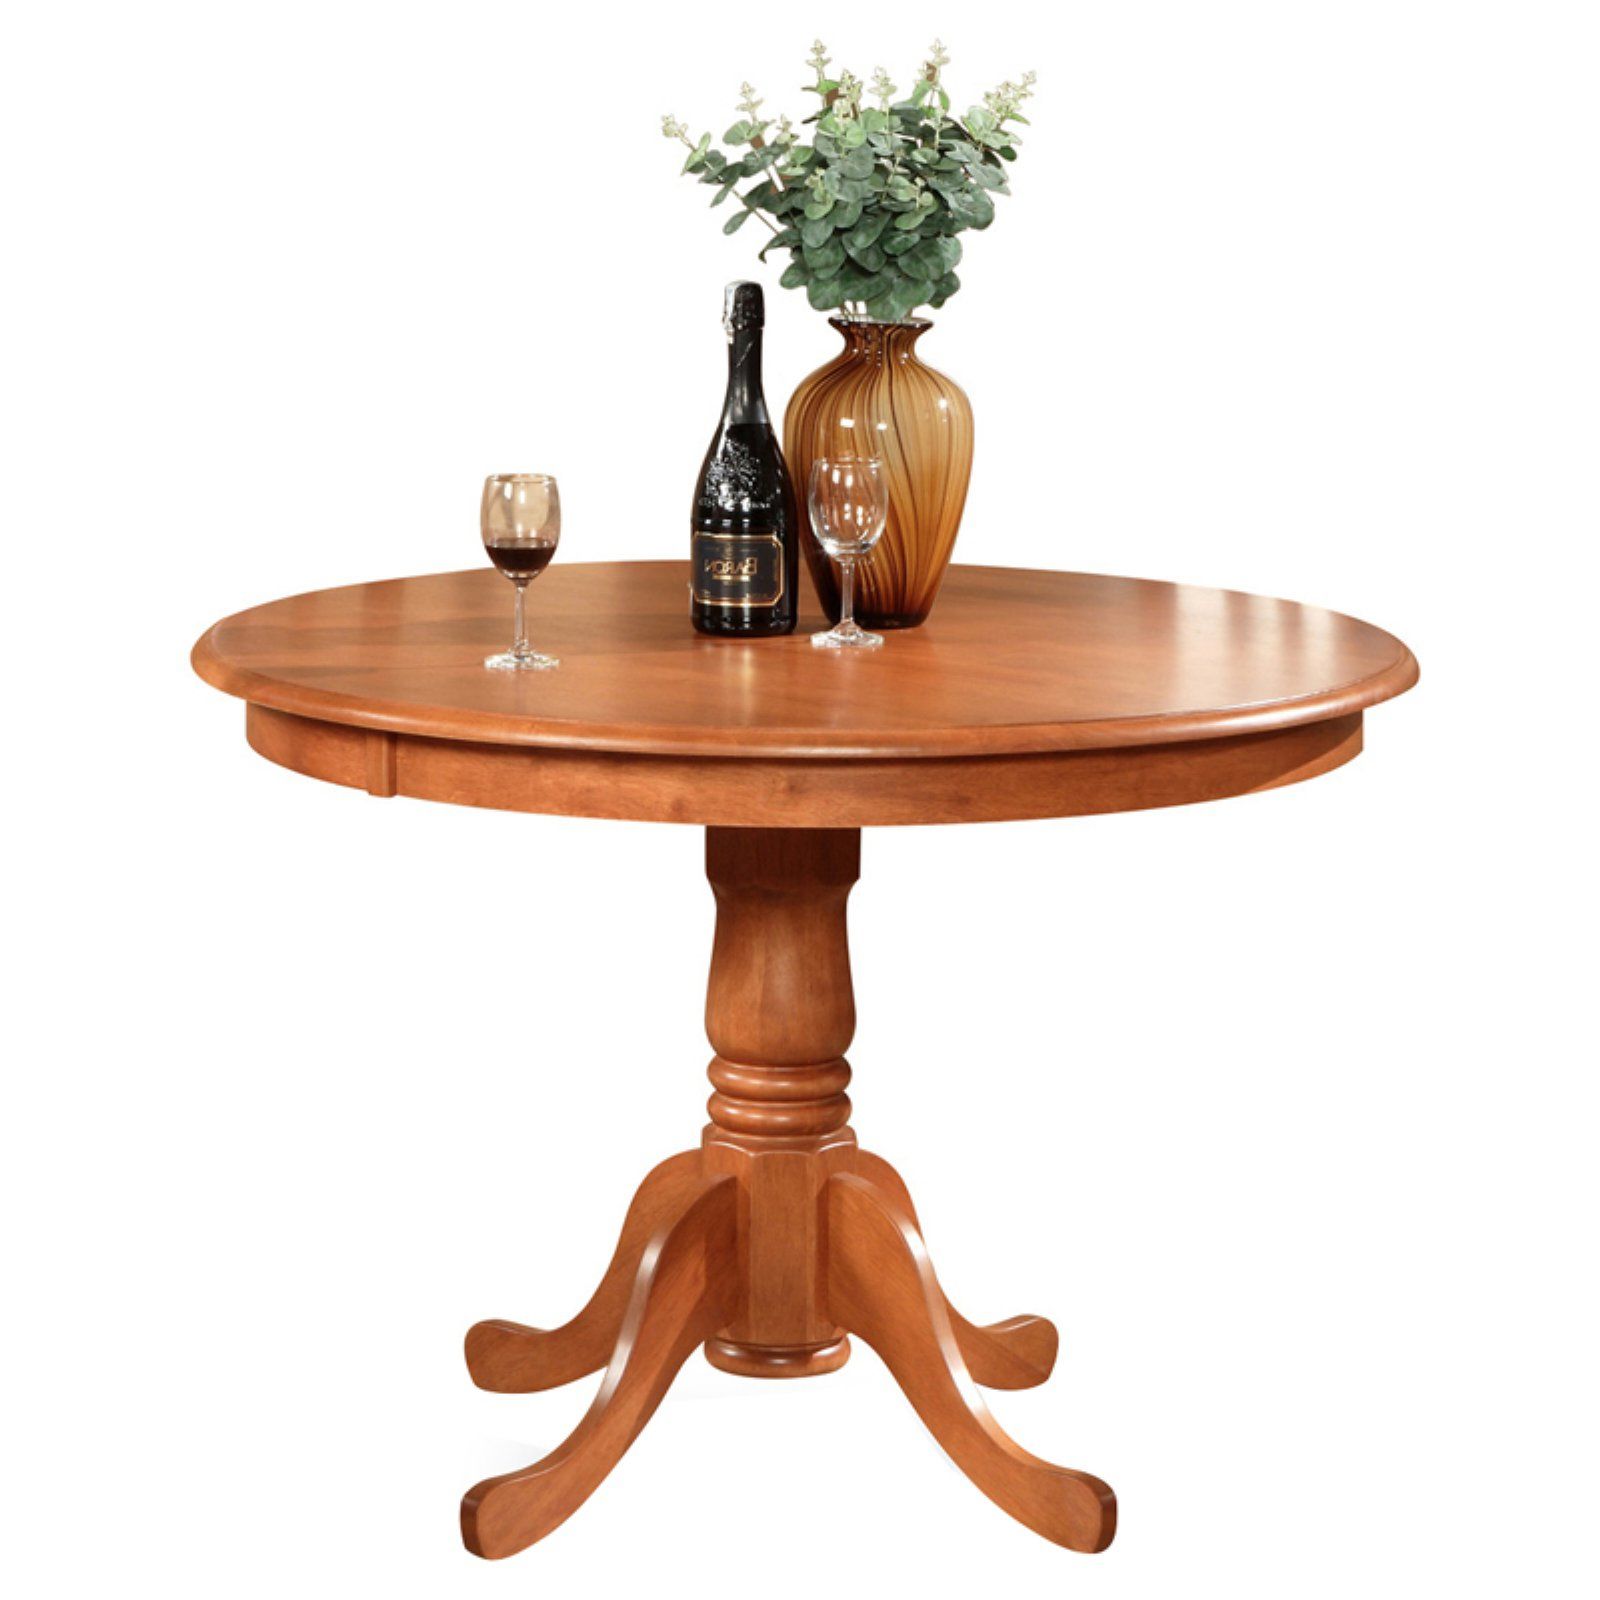 East West Furniture Hartland 42 Inch Round Pedestal Dining For Current Darbonne 42'' Dining Tables (View 2 of 20)